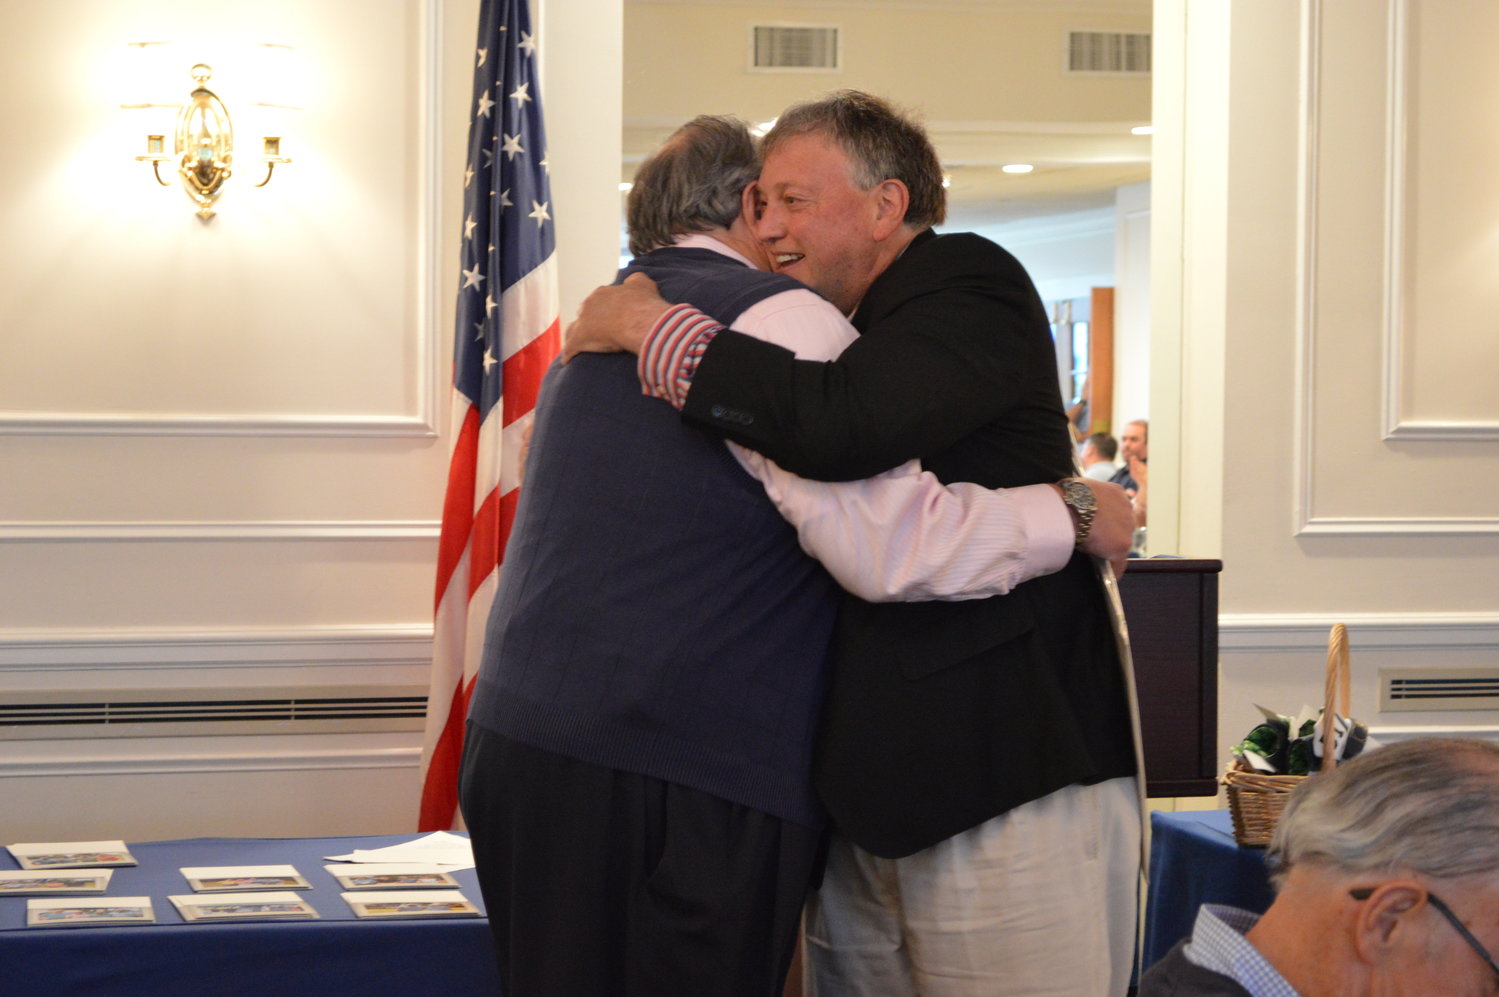 Old friends Mayor Murray and honoree Brian Joesten embrace before the crowd at the Rockville Links’ dining hall.